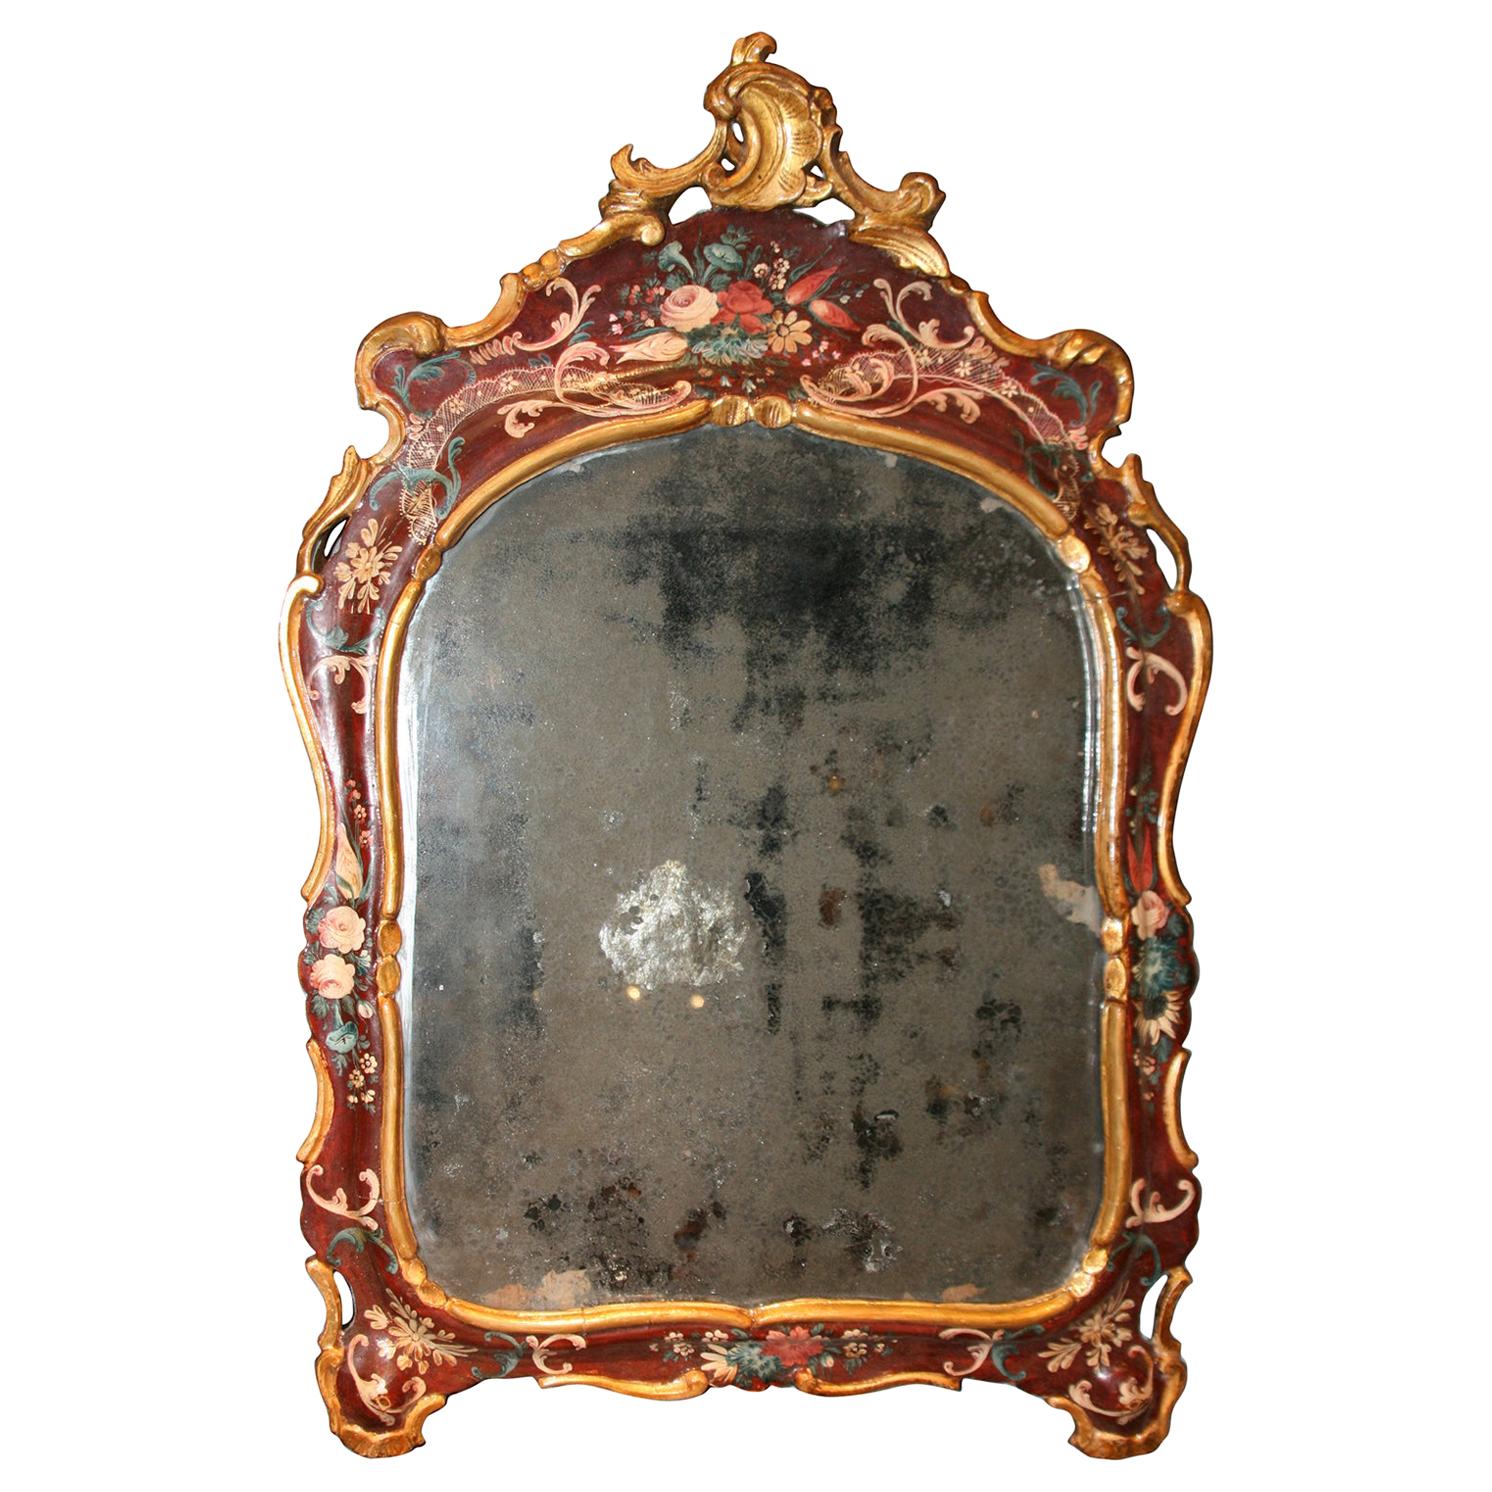 Venice Italy Mid-18th Century Red Wooden Lacquered Mercury Glass Mirror